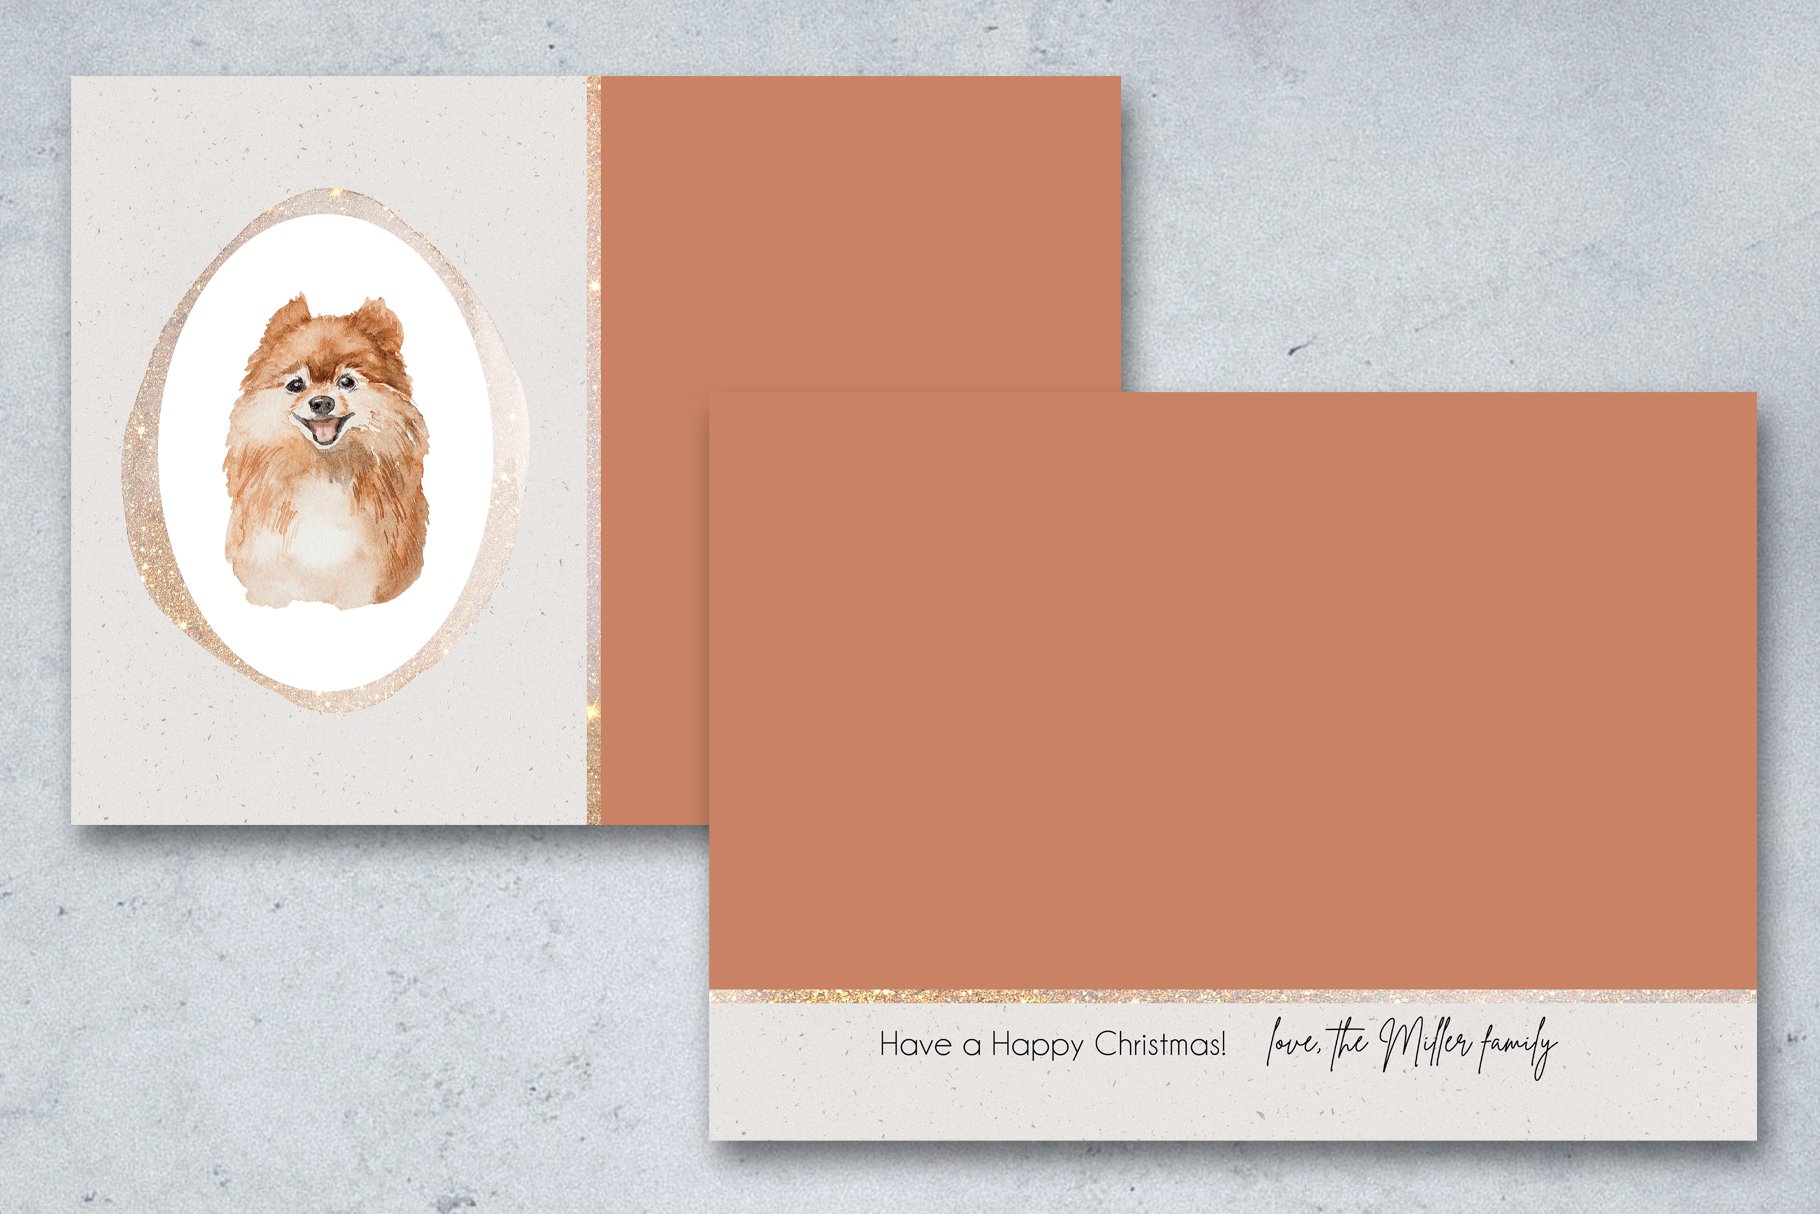 Postcard in minimalistic style with cute dog.